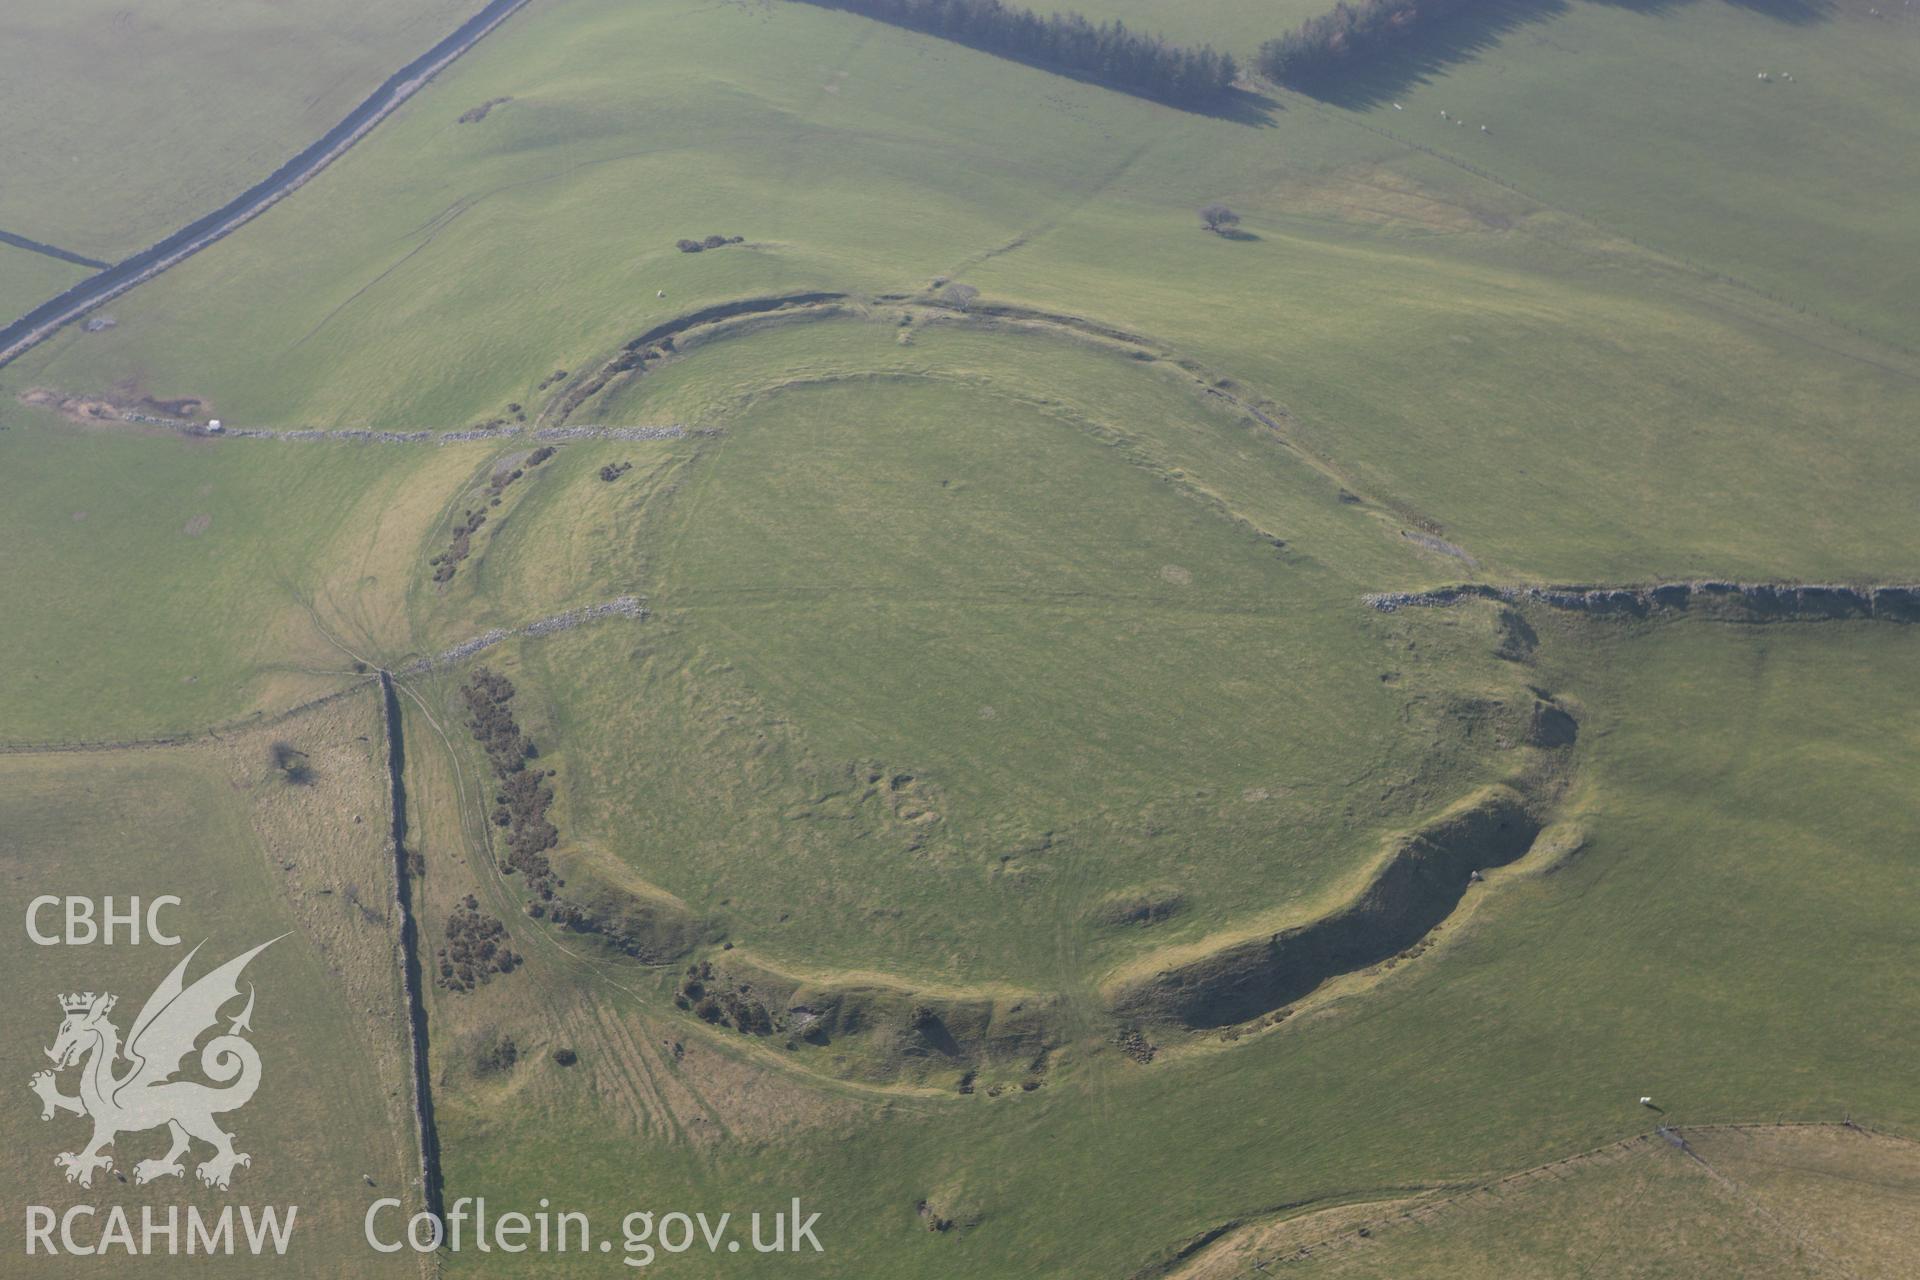 RCAHMW colour oblique photograph of Caer Caradog hillfort. Taken by Toby Driver on 18/03/2009.